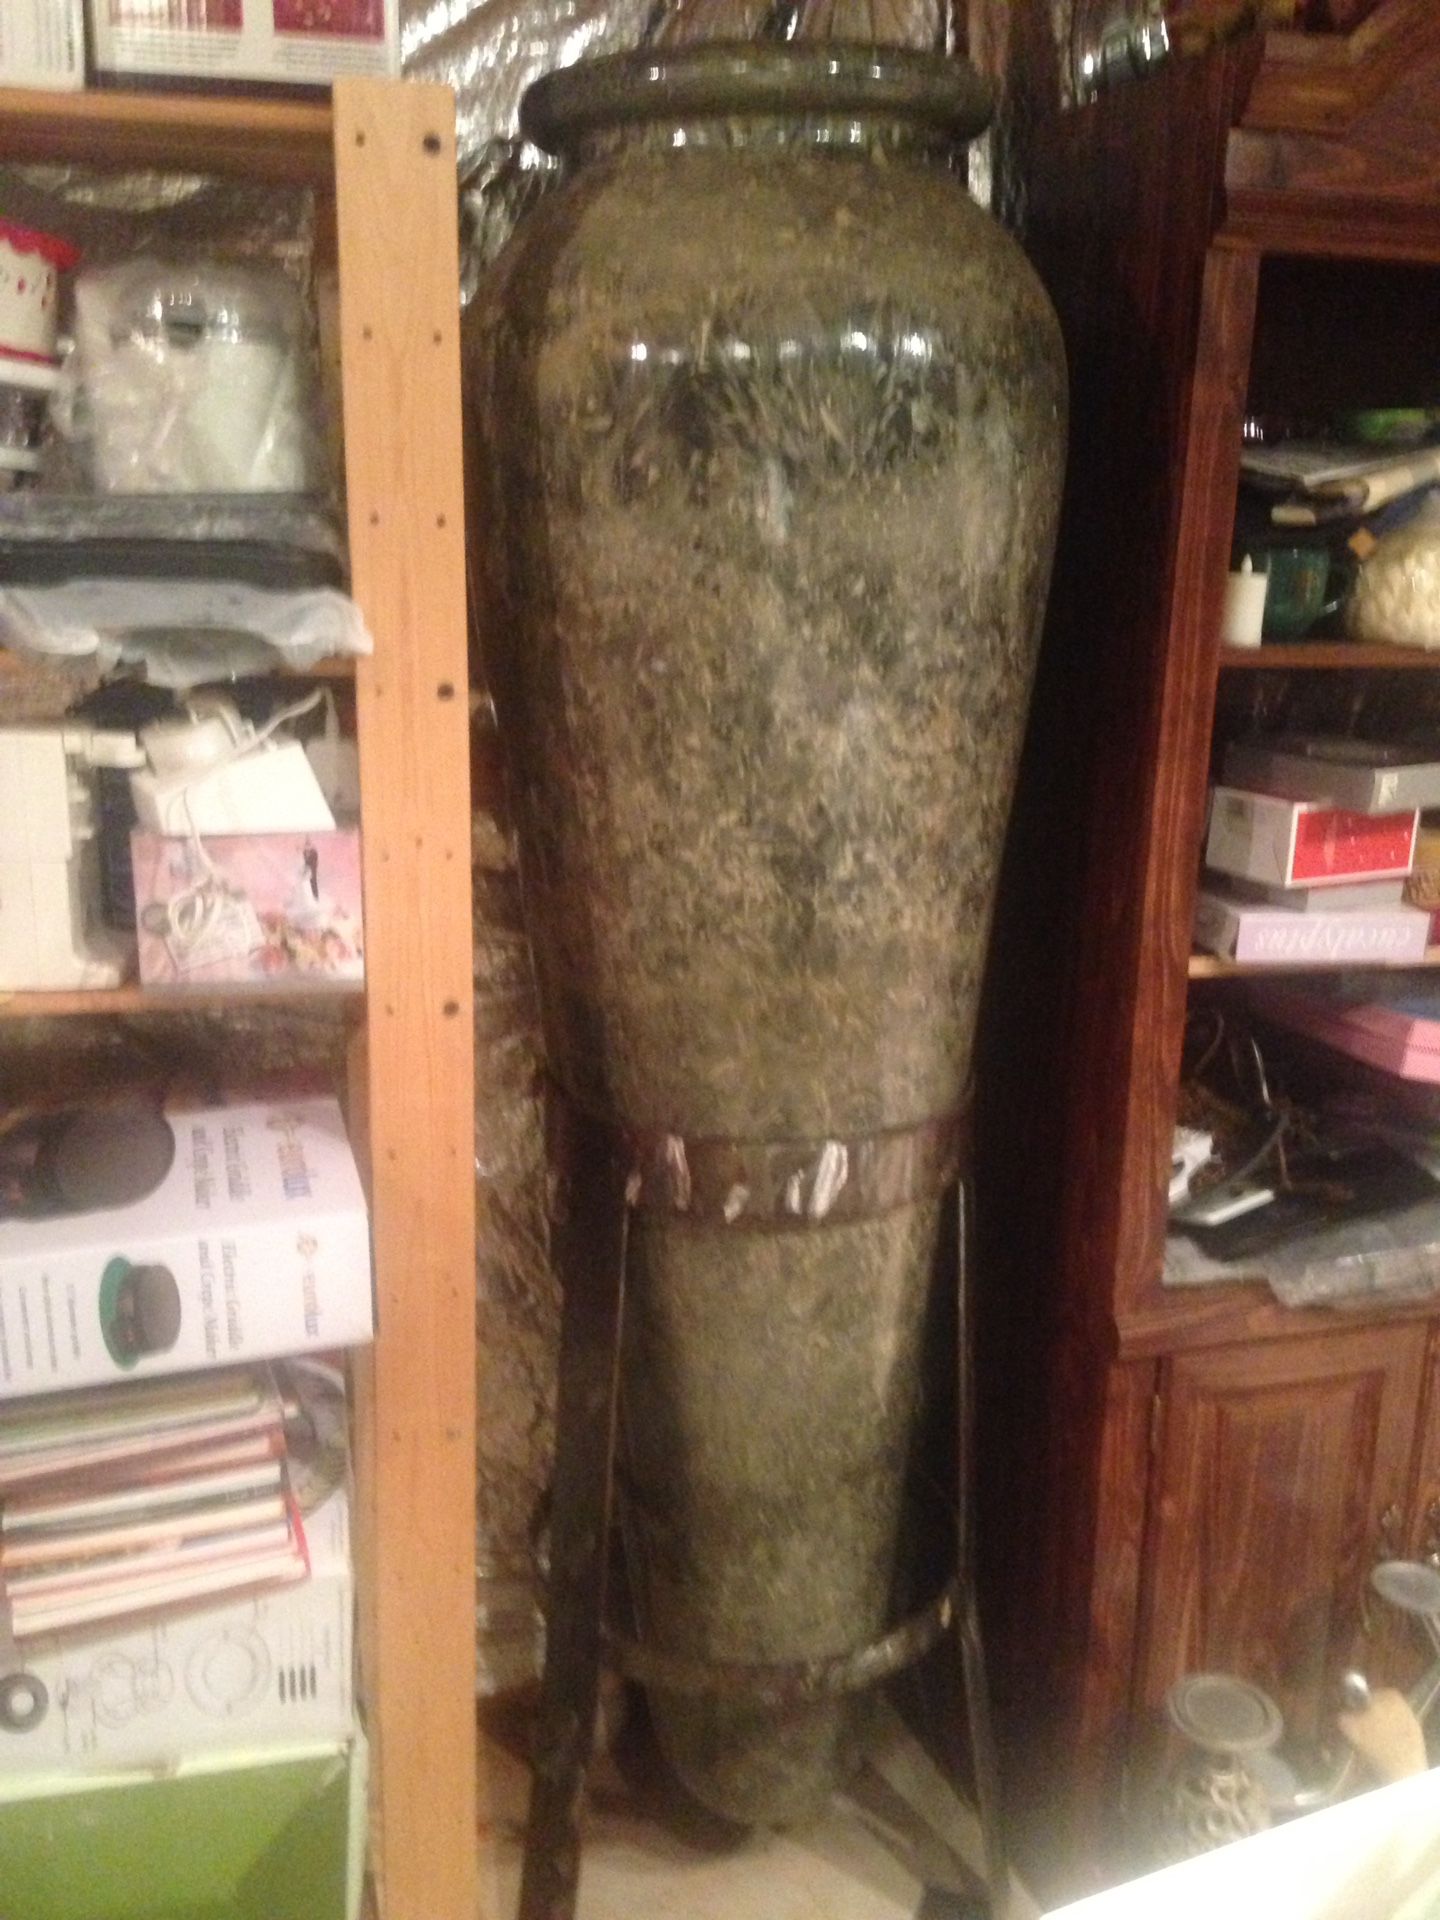 6ft. Tall vase with wrought iron stand. Very good condition. Cash only, non smoking, no delivery.